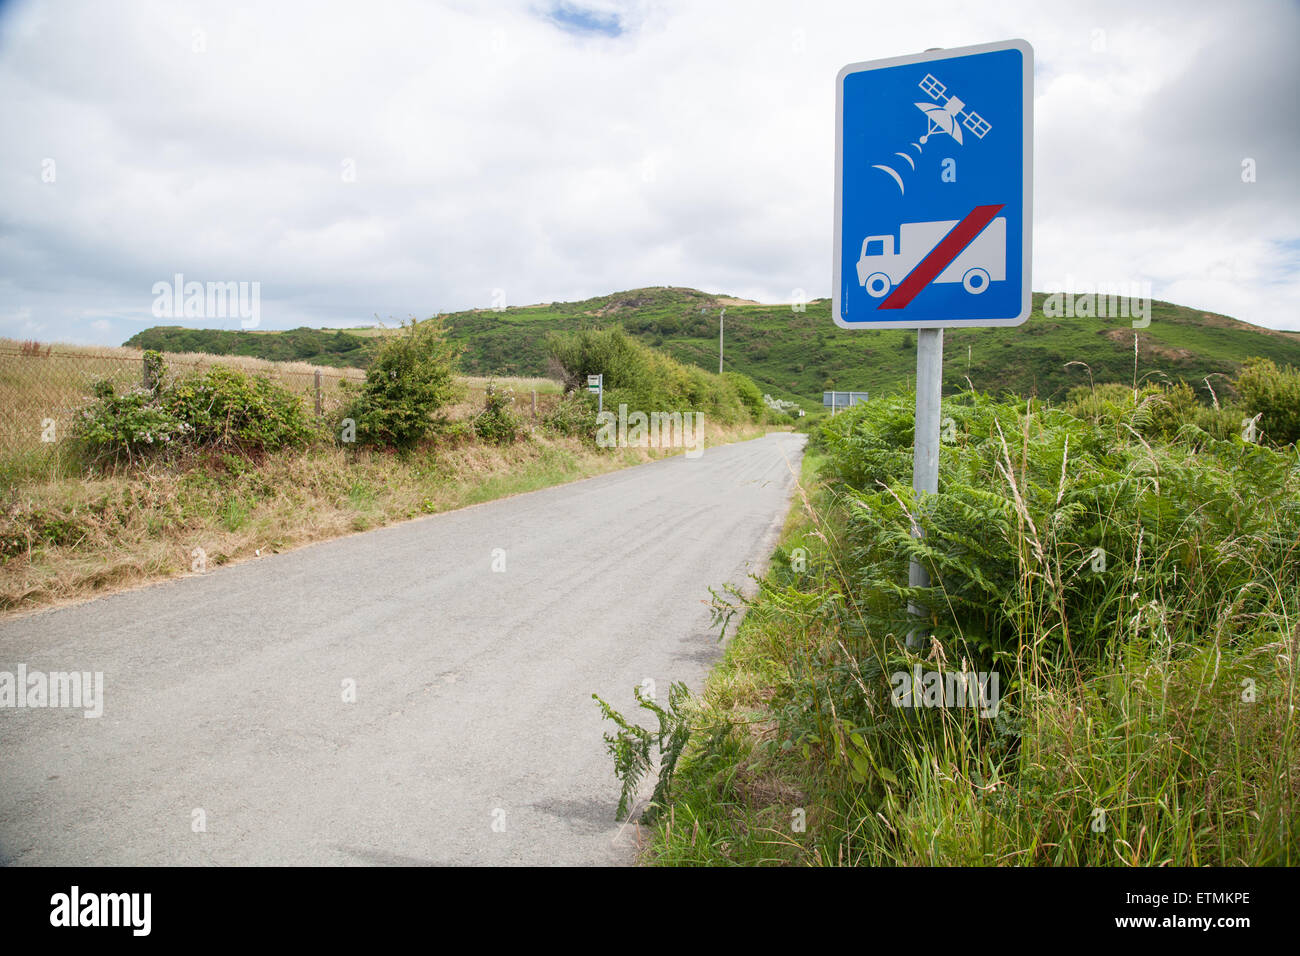 Warning sign for lorry drivers not to follow Sat Nav. Stock Photo